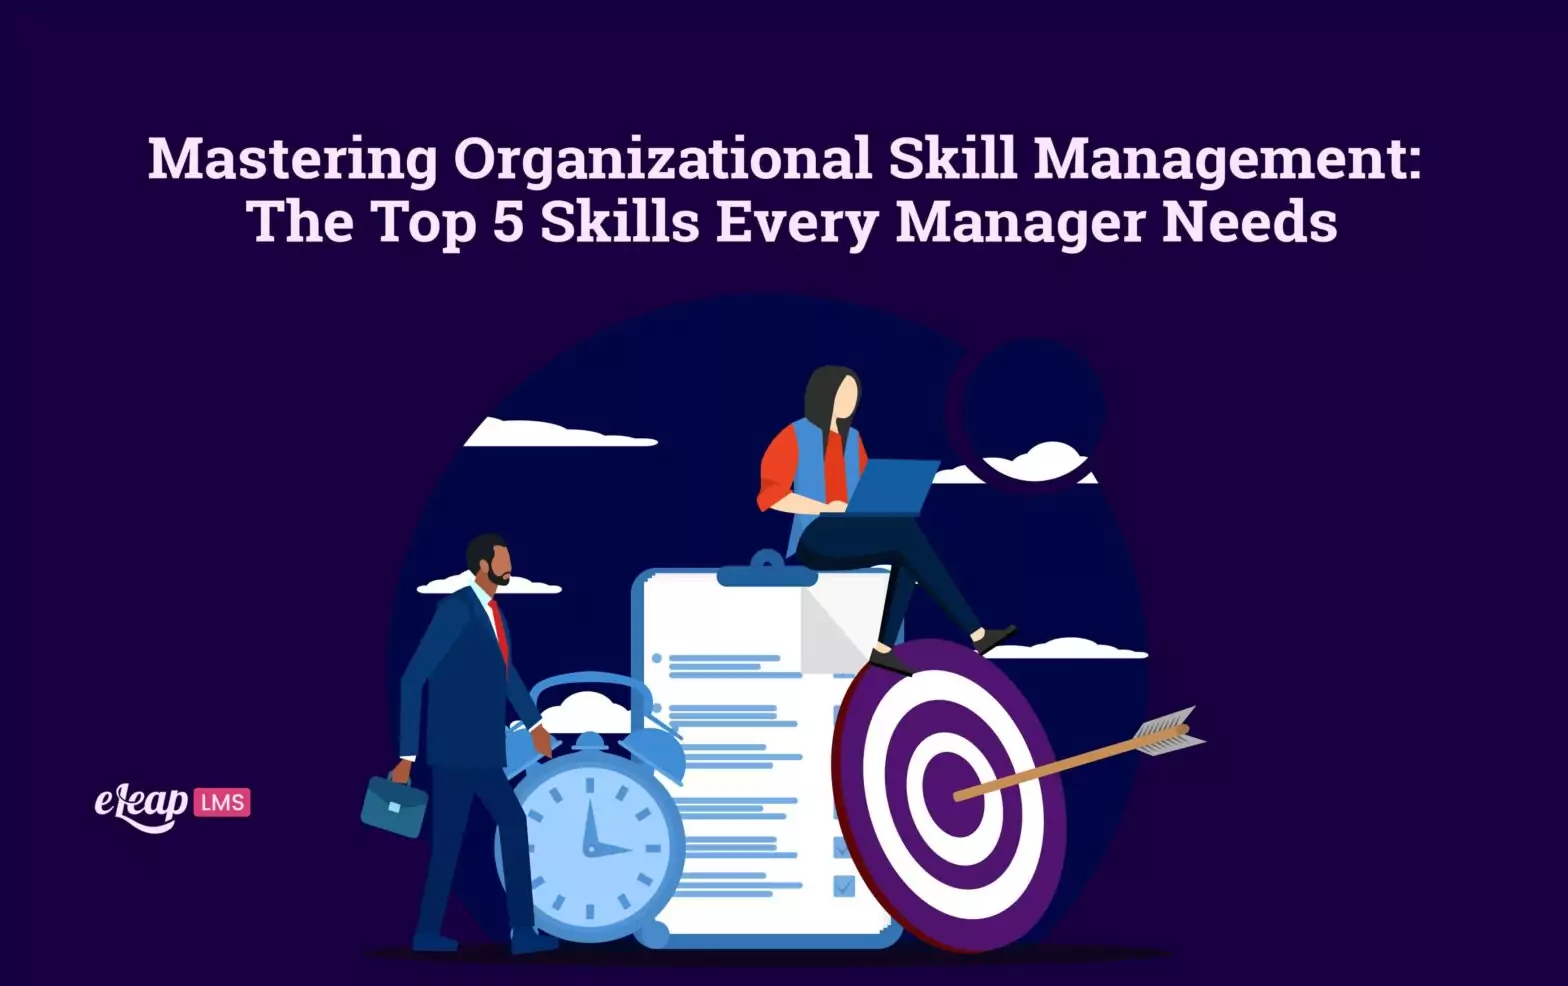 Mastering Organizational Skill Management: The Top 5 Skills Every Manager Needs